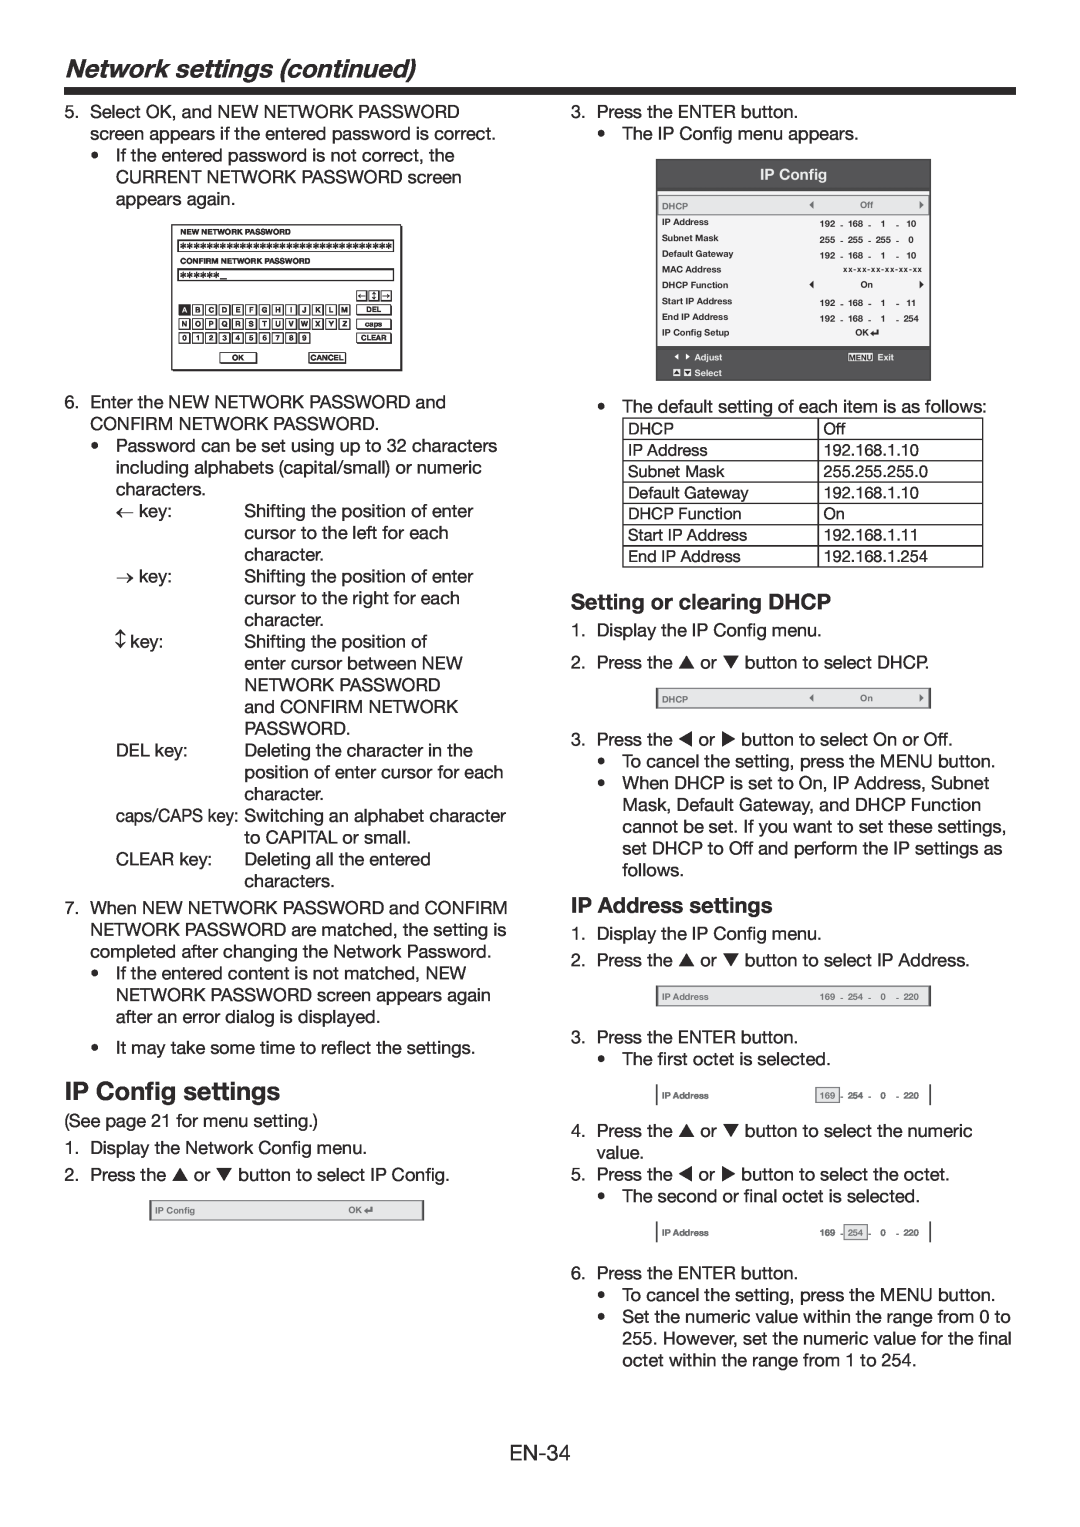 Mitsubishi Electronics WD390U-EST user manual Network settings continued, IP Config settings, Setting or clearing DHCP 